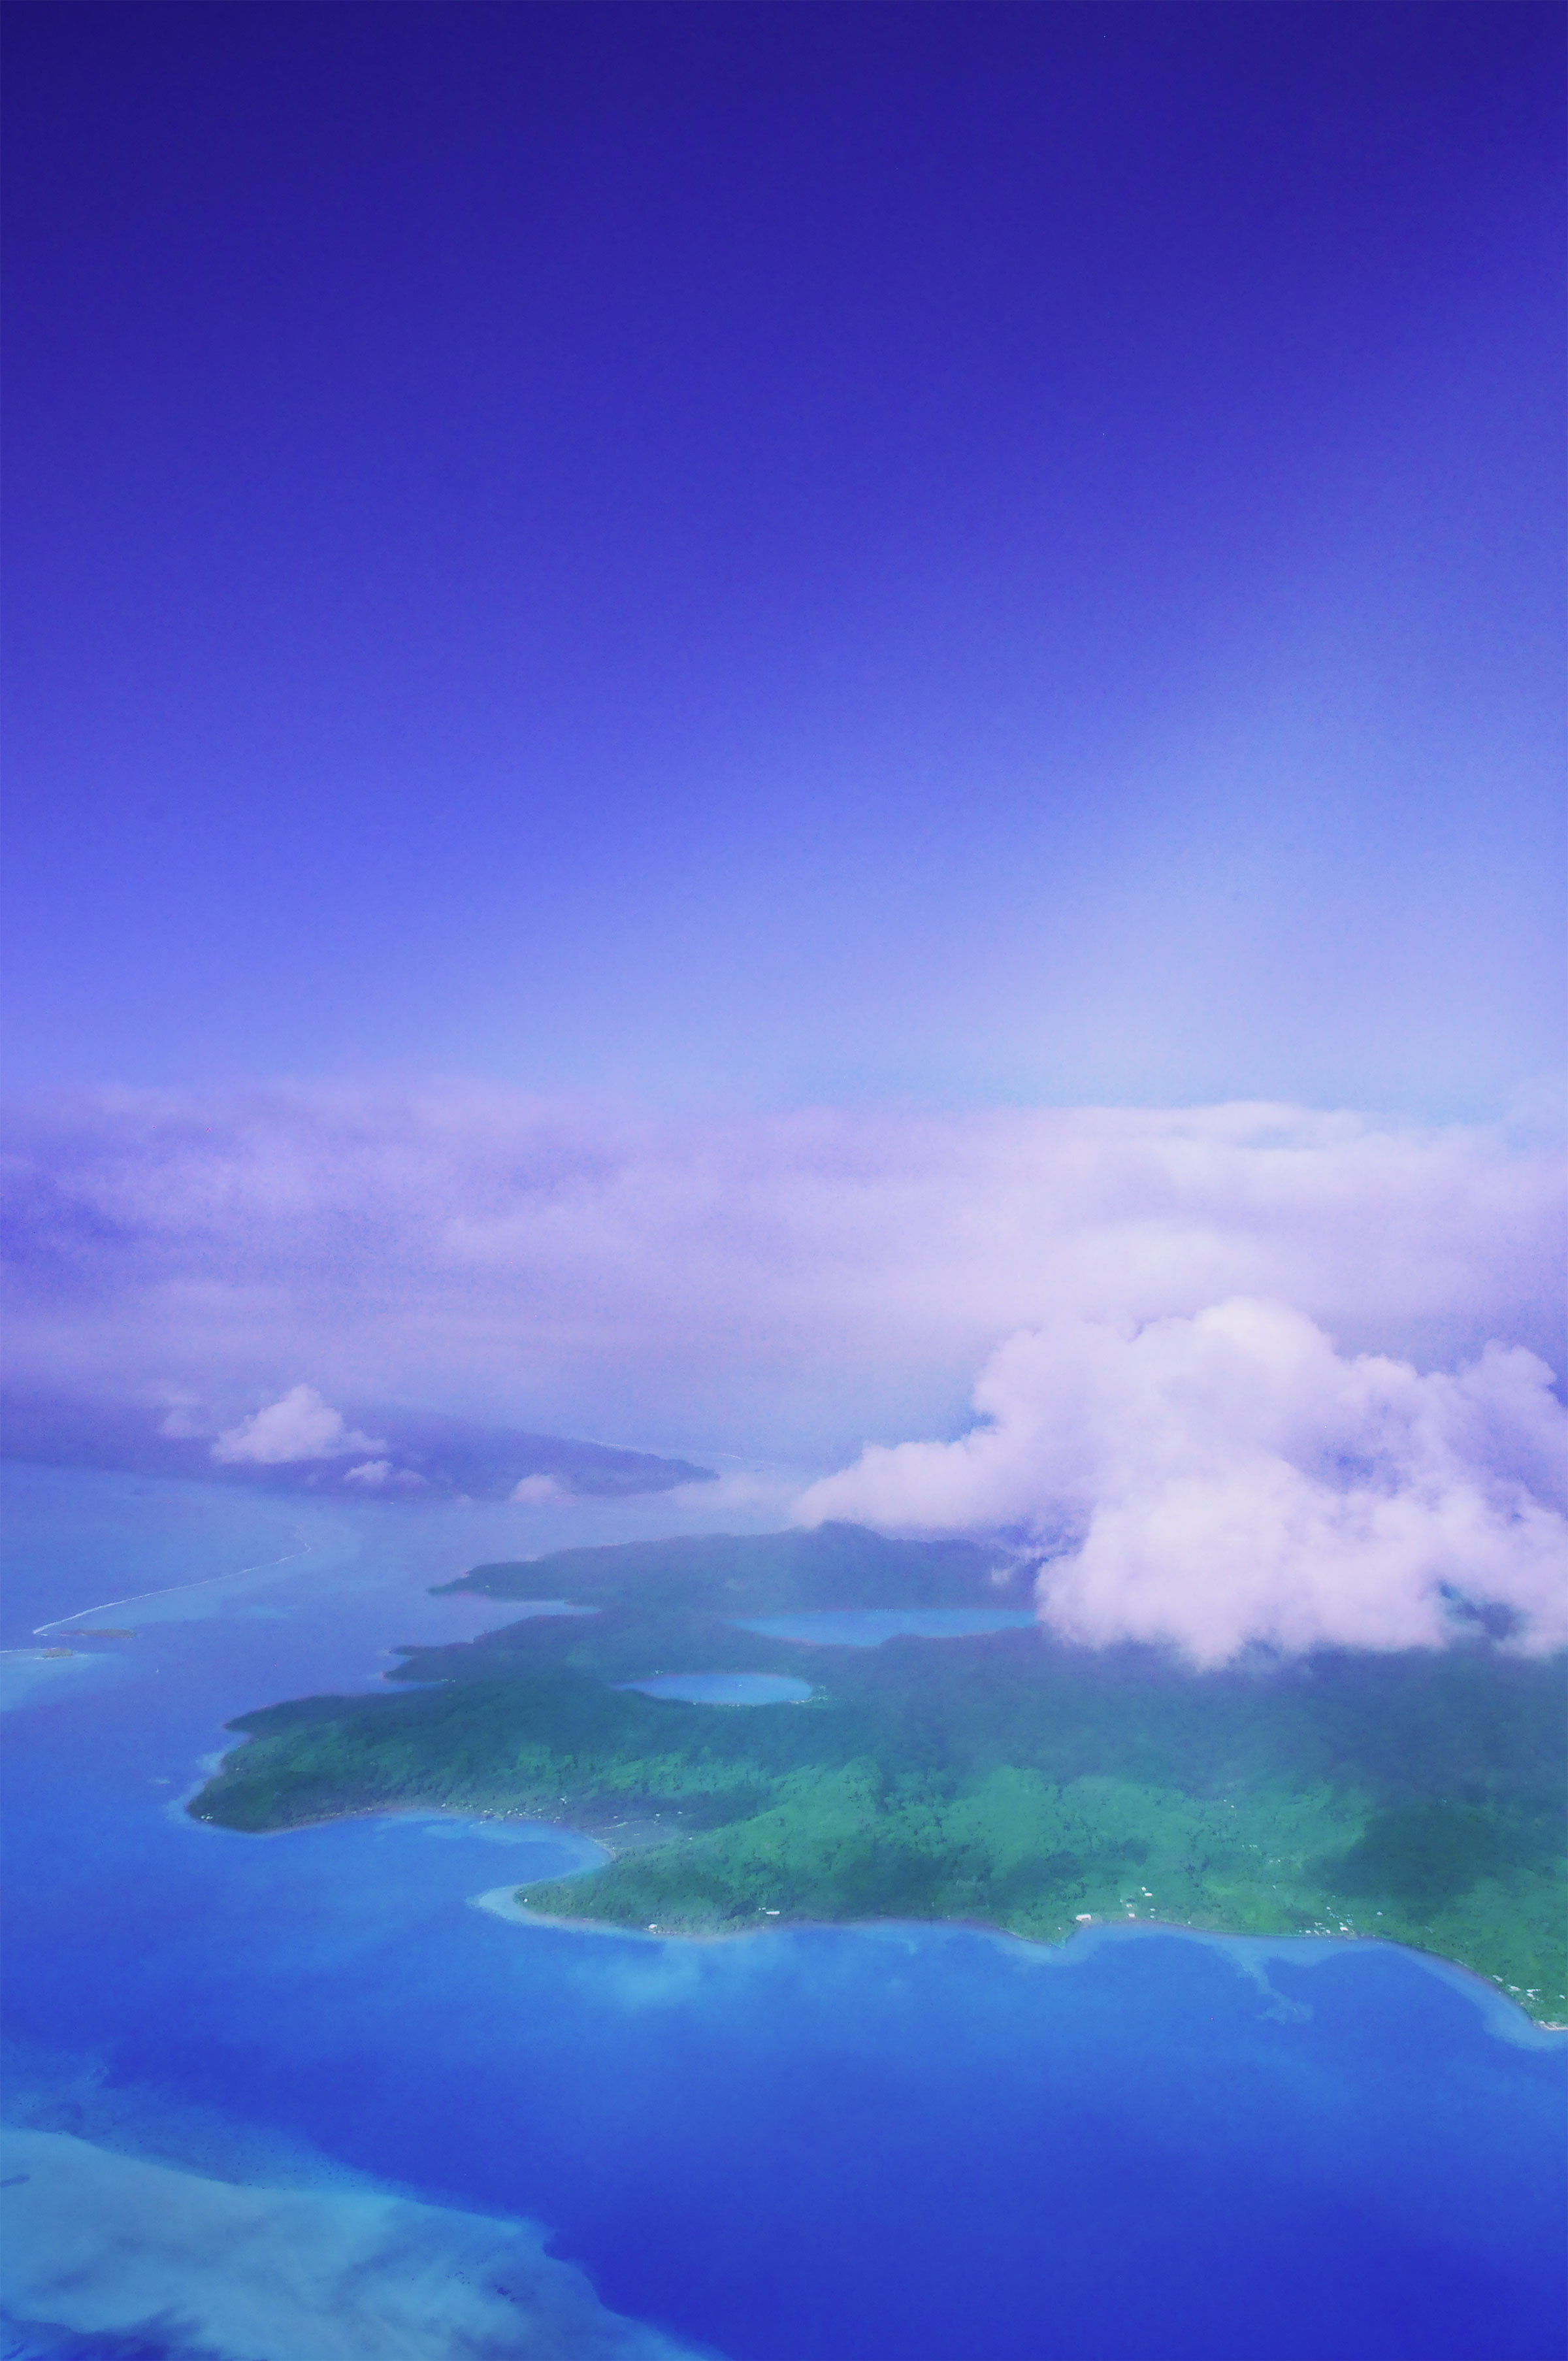 French Polynesia, Raiatea island and its blue bays Faaha and Haamene view from the sky, and the island of Tahaa just behind. (Nos Dren)